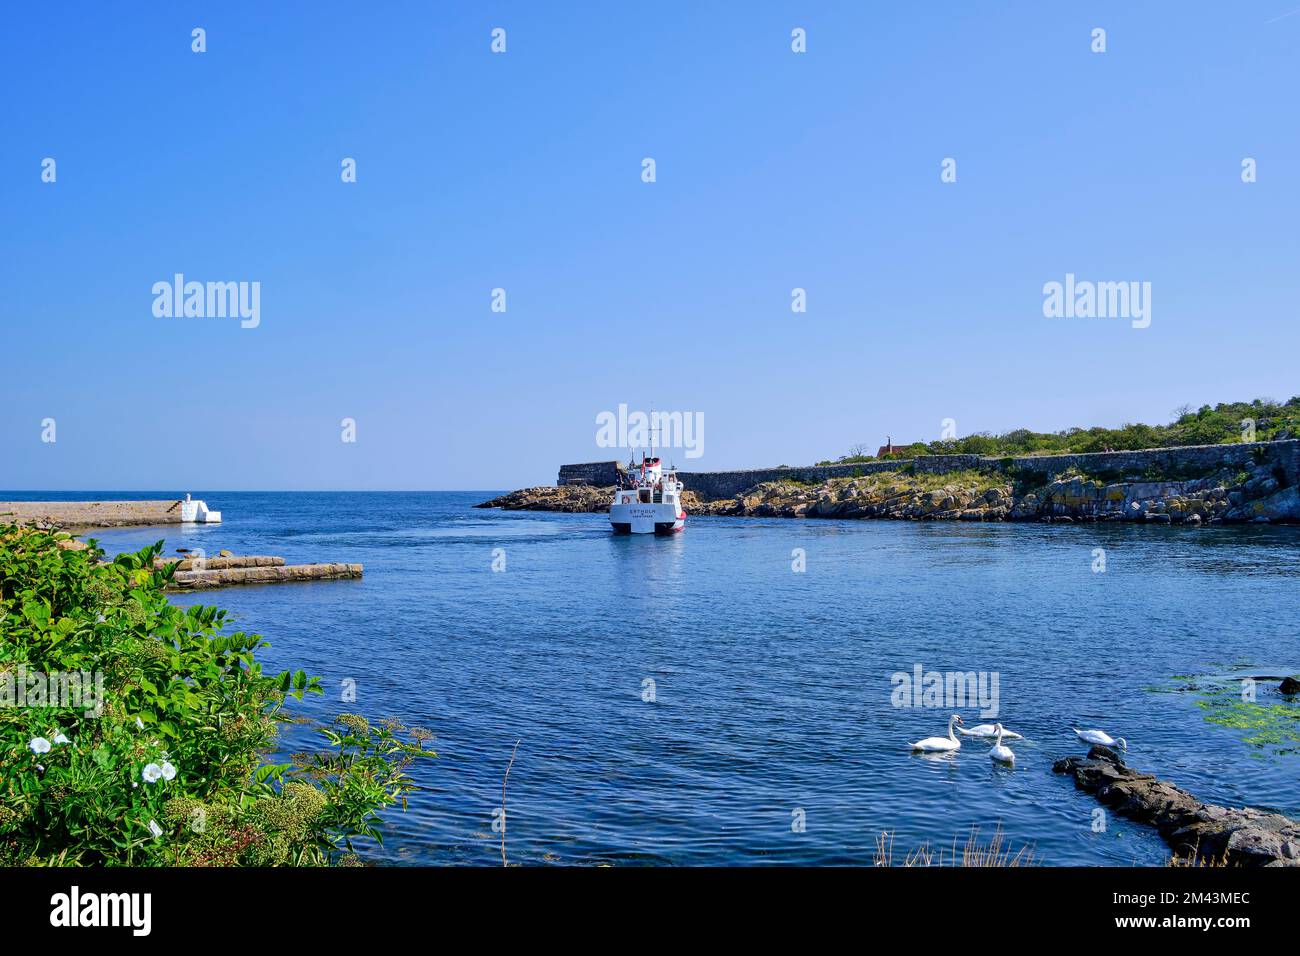 Out and about on the Ertholmen islands, view of sea and marine traffic from Frederiksö, Ertholmene, Denmark, Scandinavia, Europe. Stock Photo